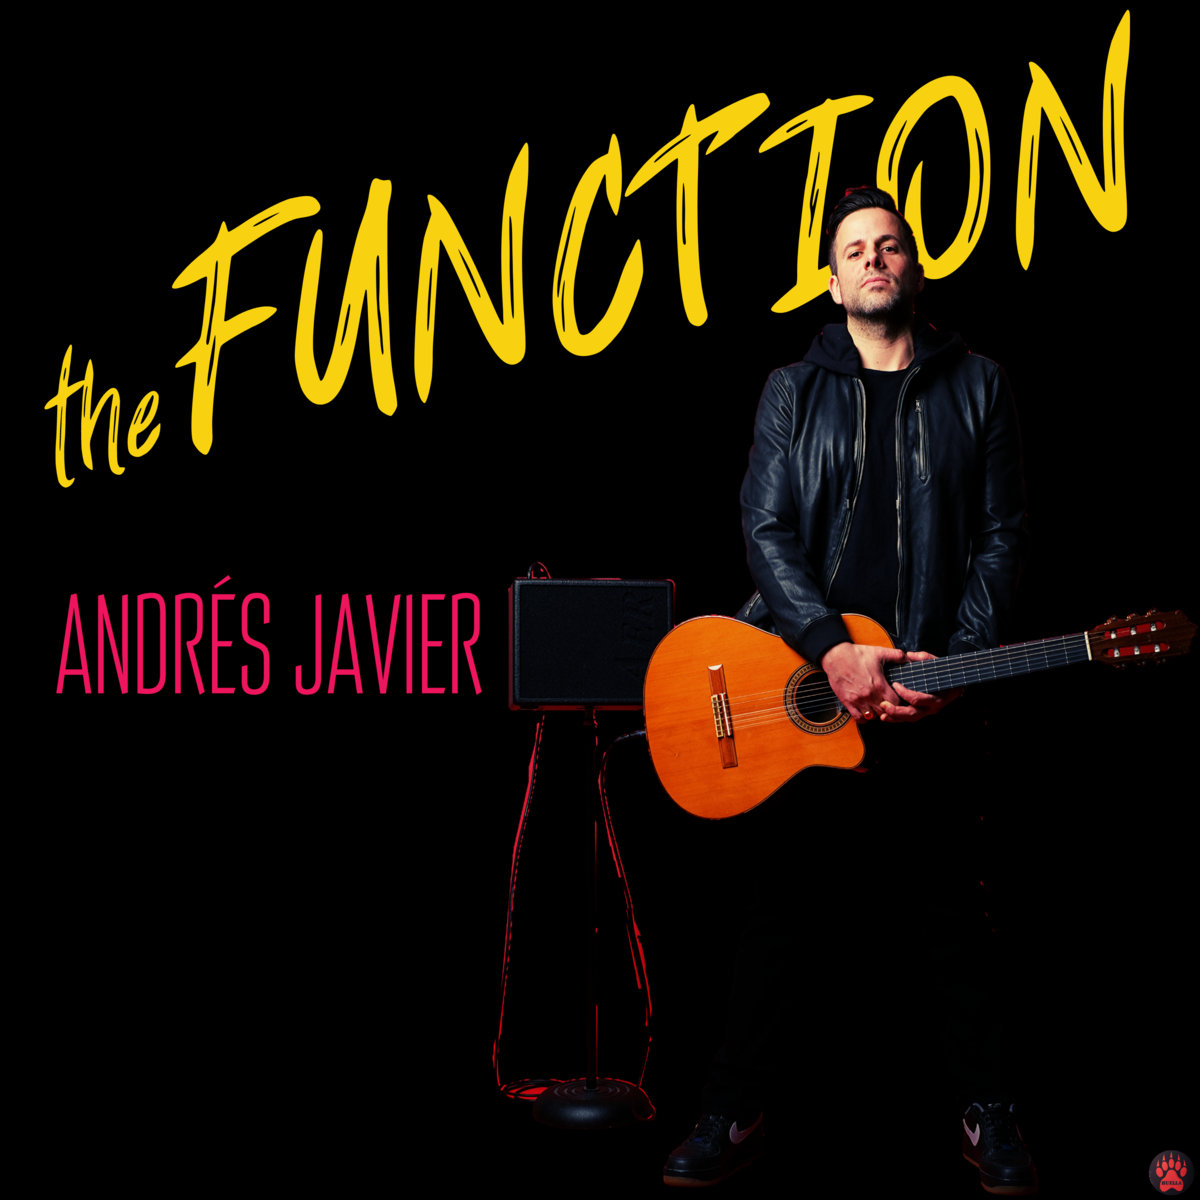 Andres Javier